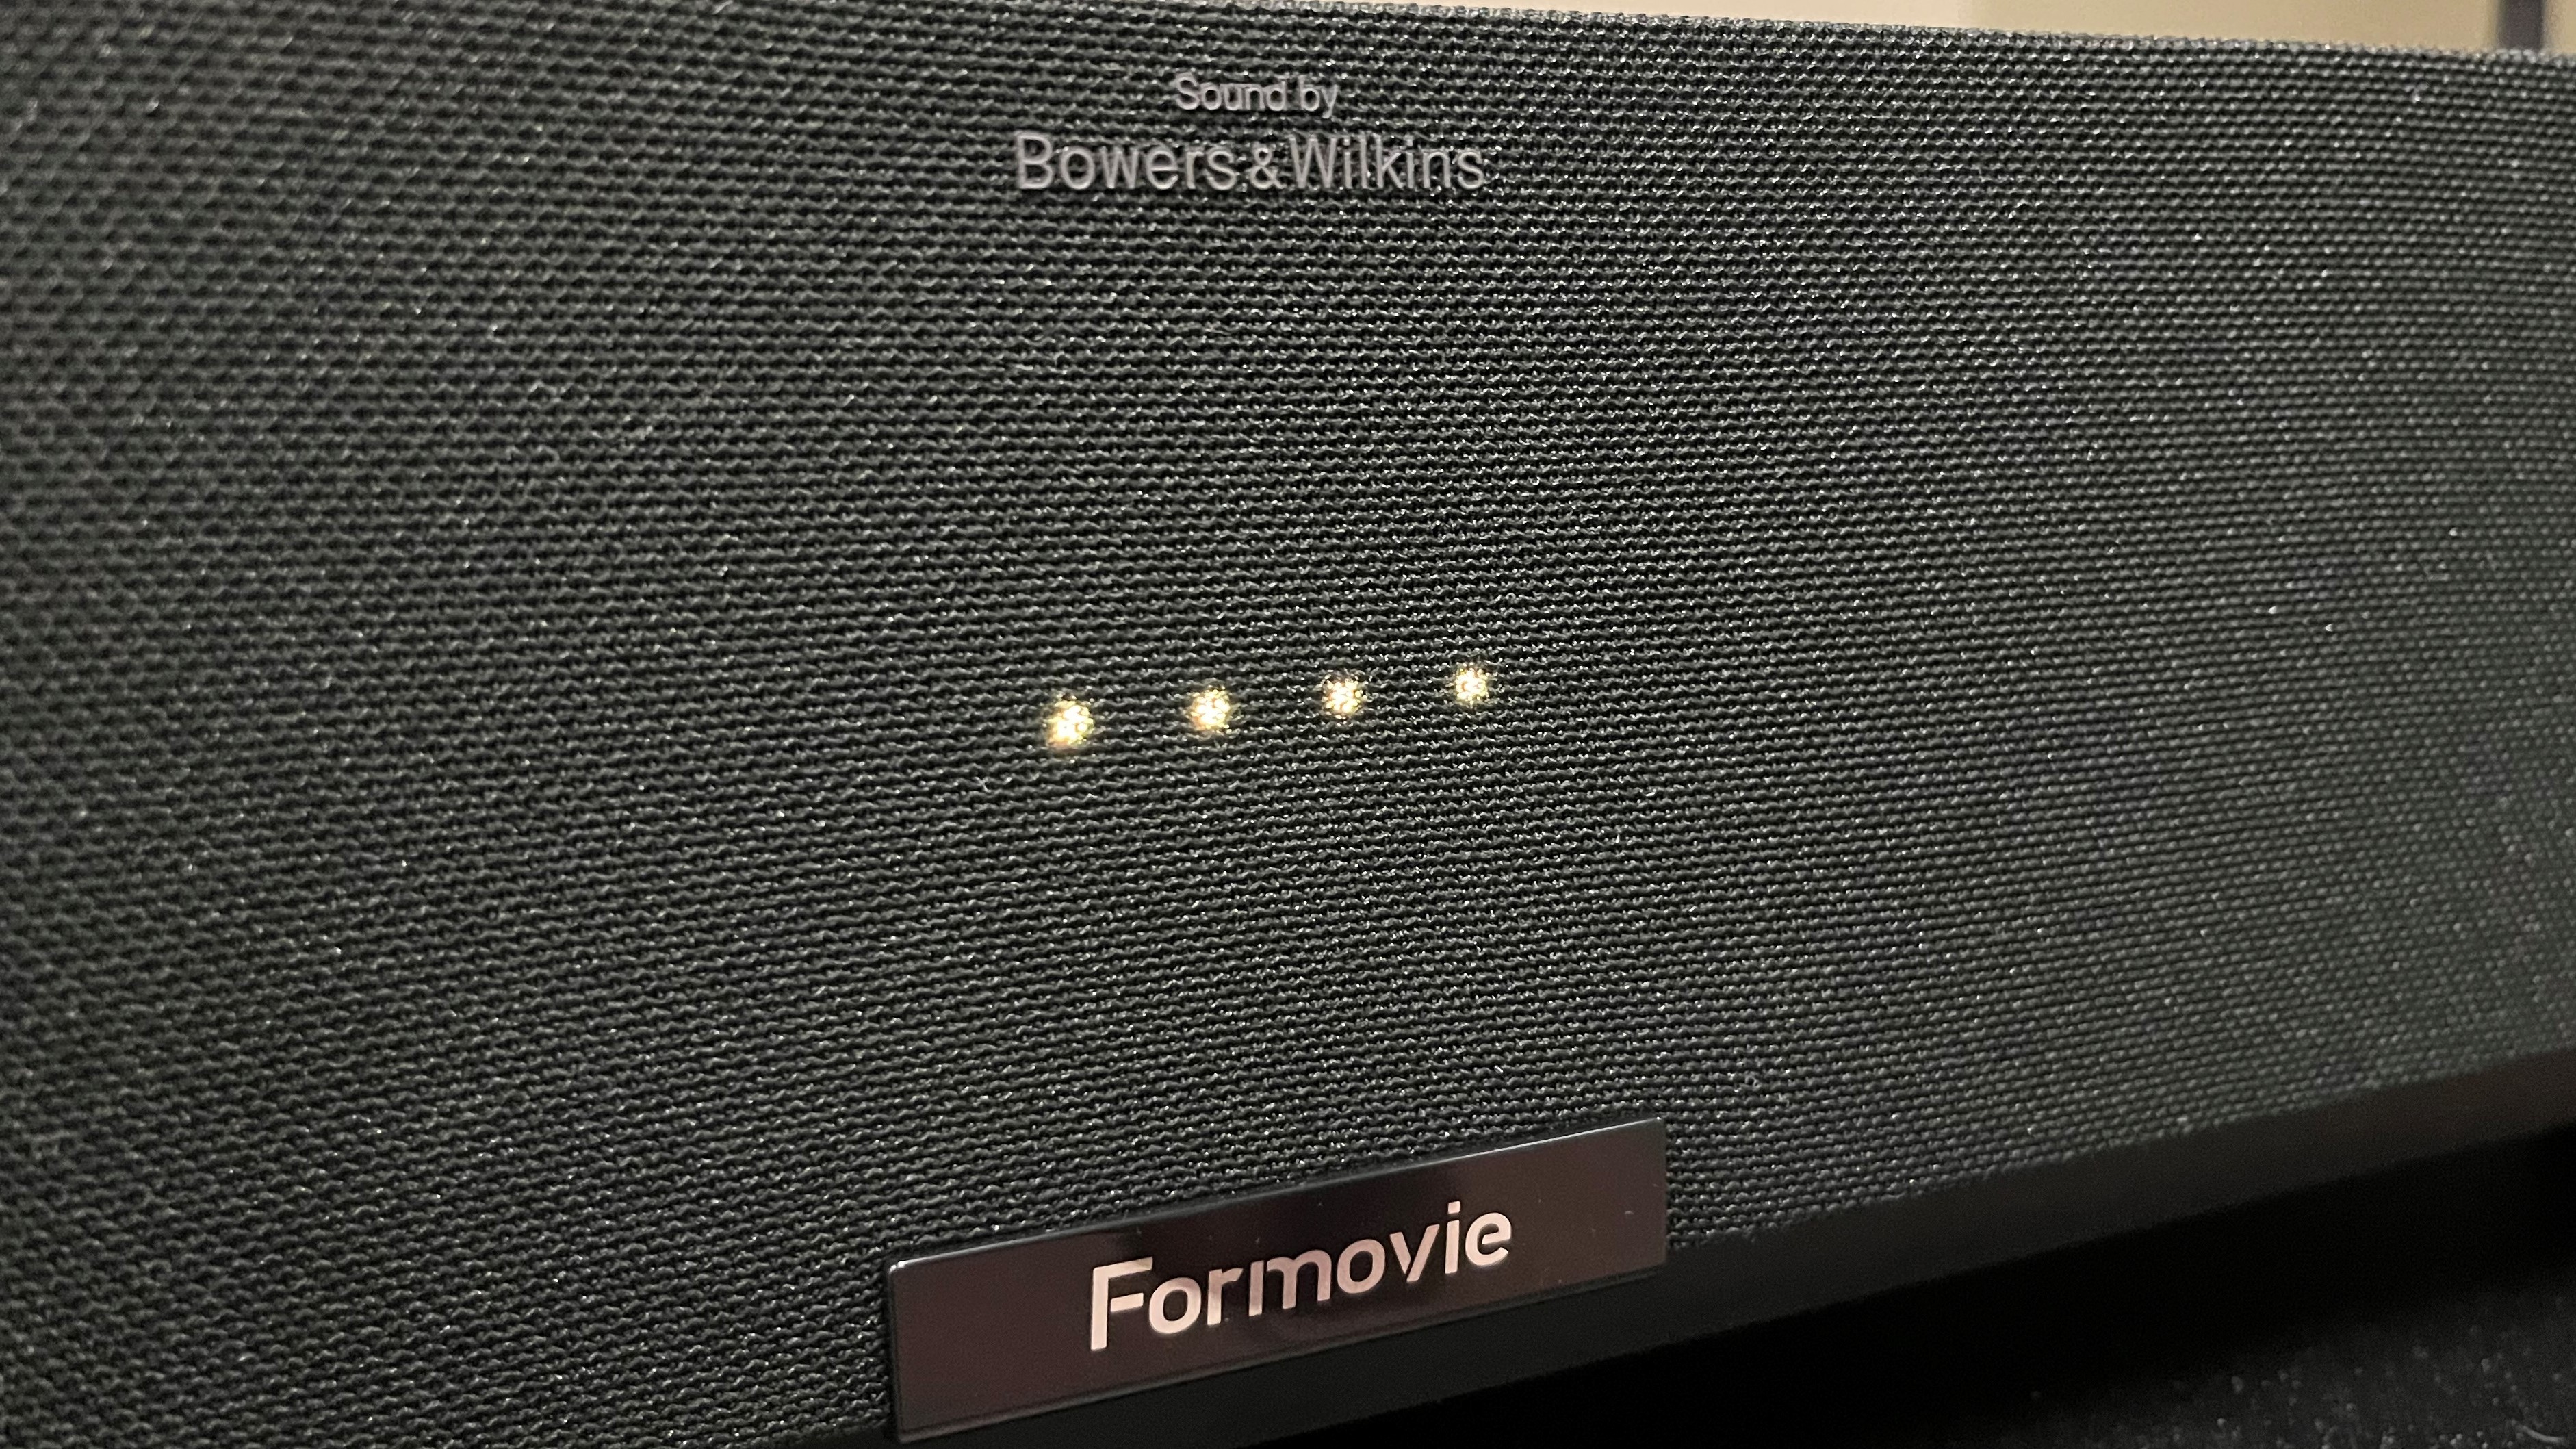 Formovie theater projector front panel logos